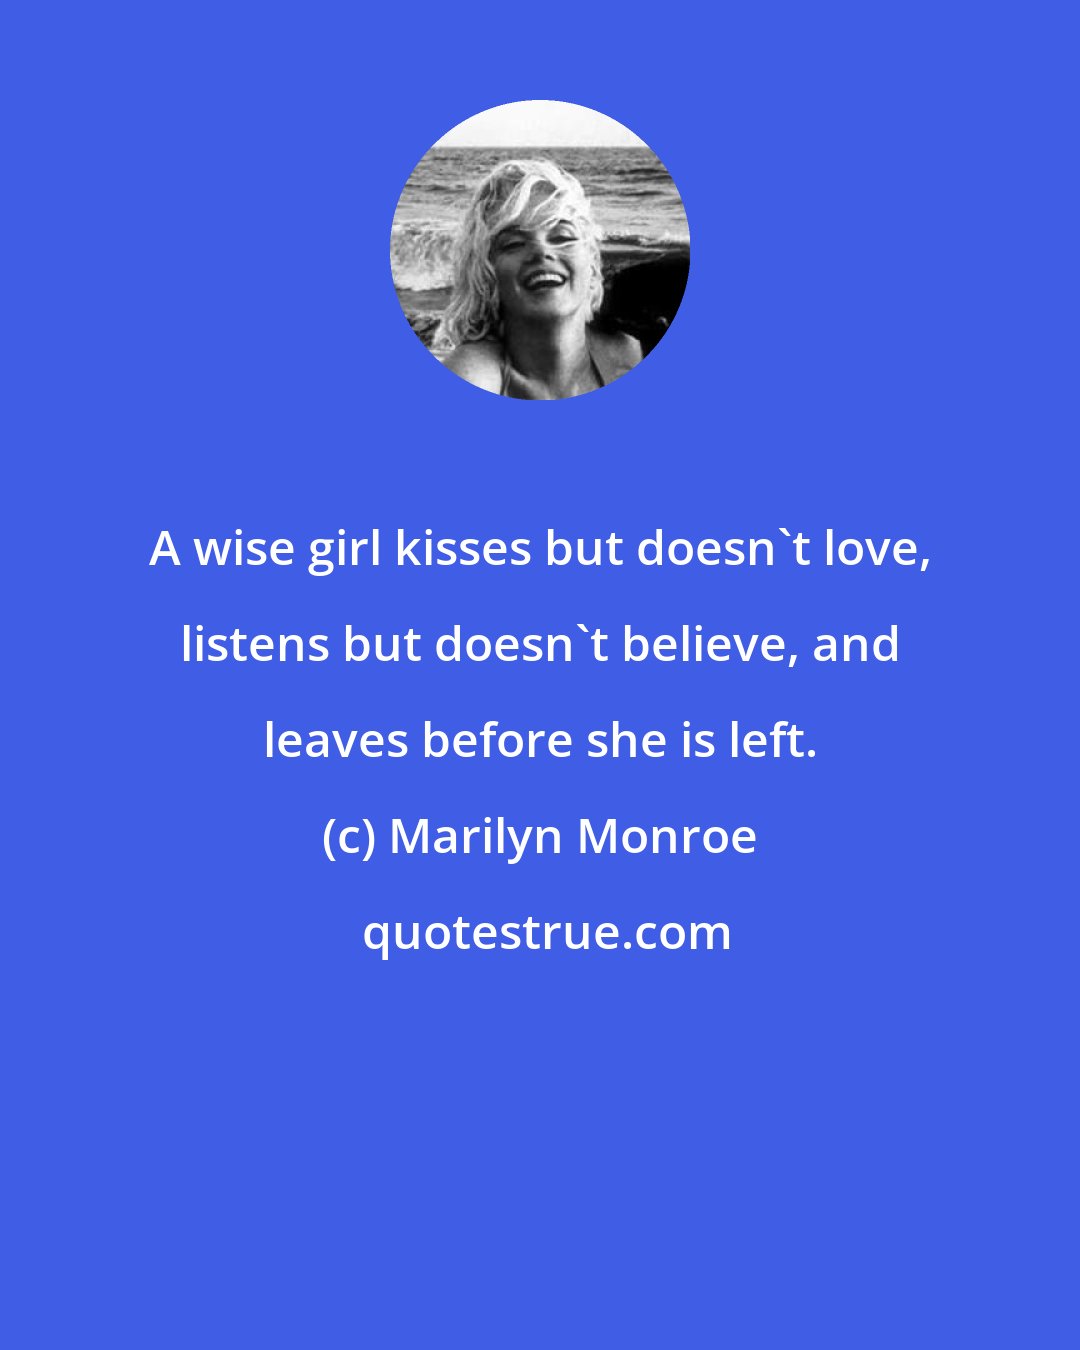 Marilyn Monroe: A wise girl kisses but doesn't love, listens but doesn't believe, and leaves before she is left.